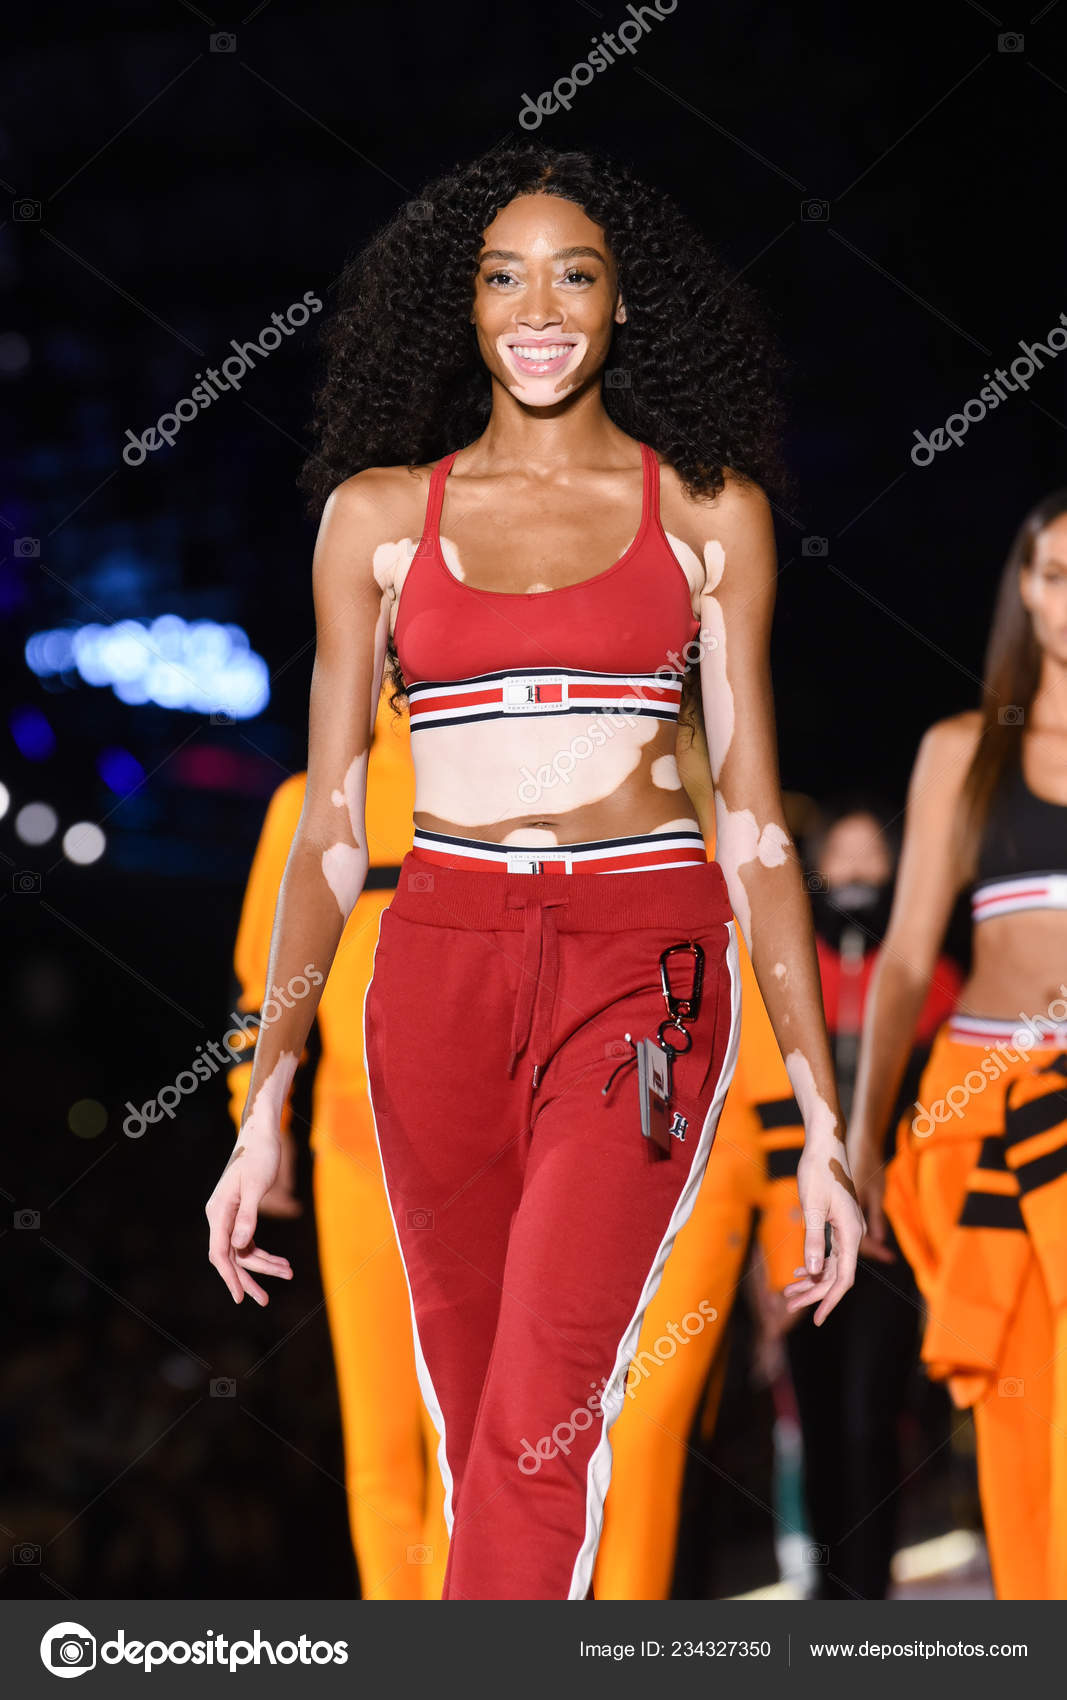 Postage Ours dead Canadian Fashion Model Winnie Harlow Displays New Creation Tommy Hilfiger's  – Stock Editorial Photo © ChinaImages #234327350